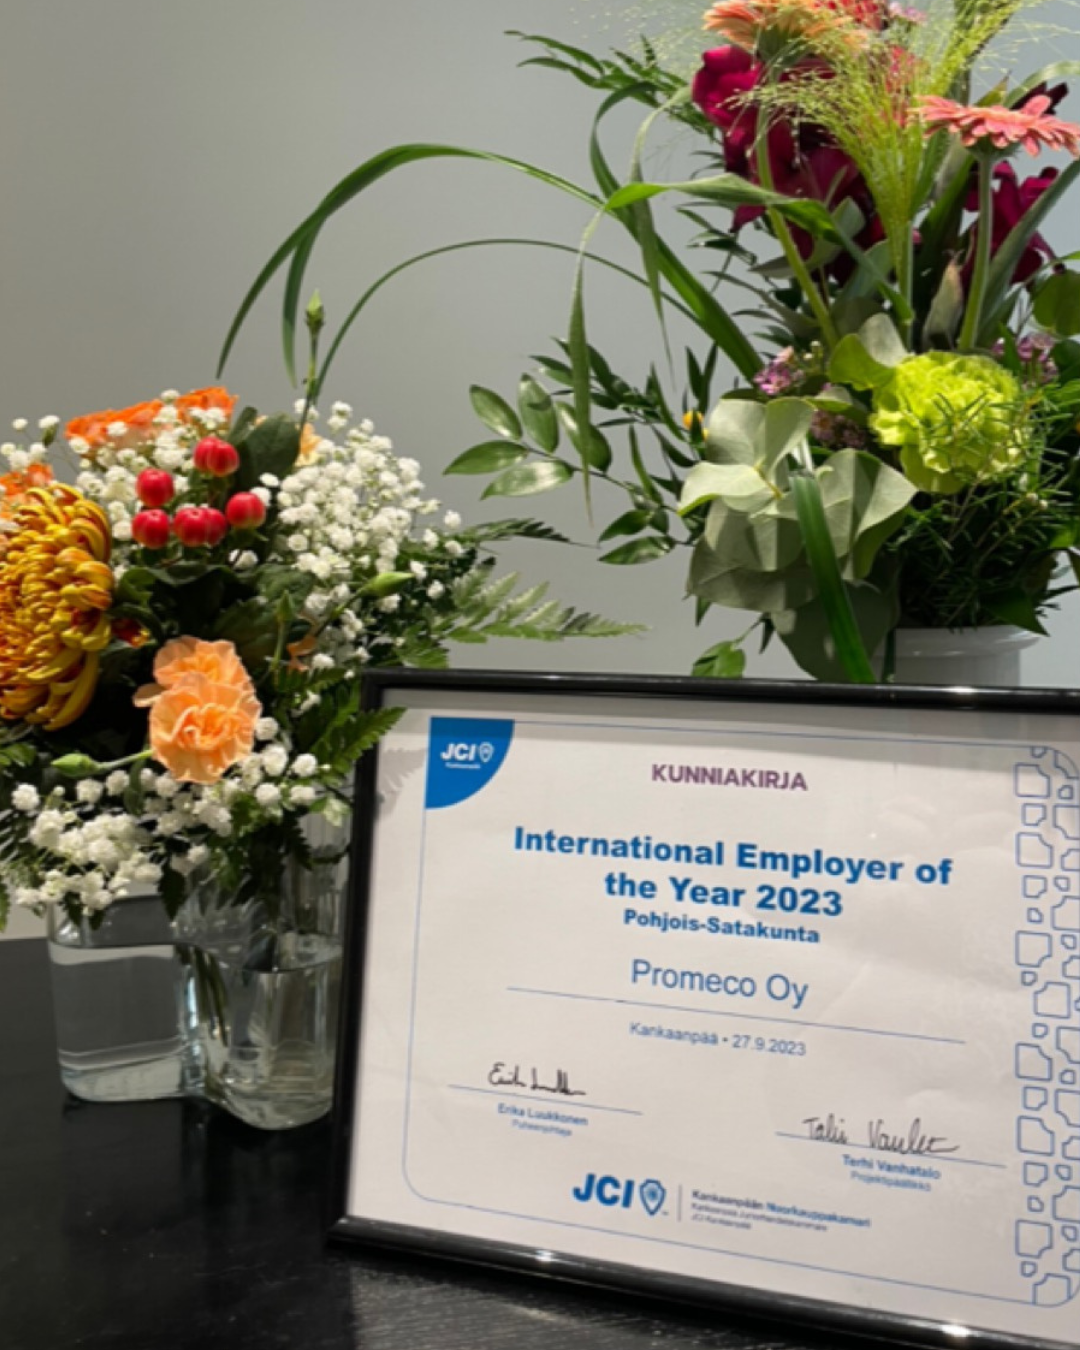 Promeco Awarded in the "International Employer of the Year 2023" Contest by Finland's Junior Chamber International